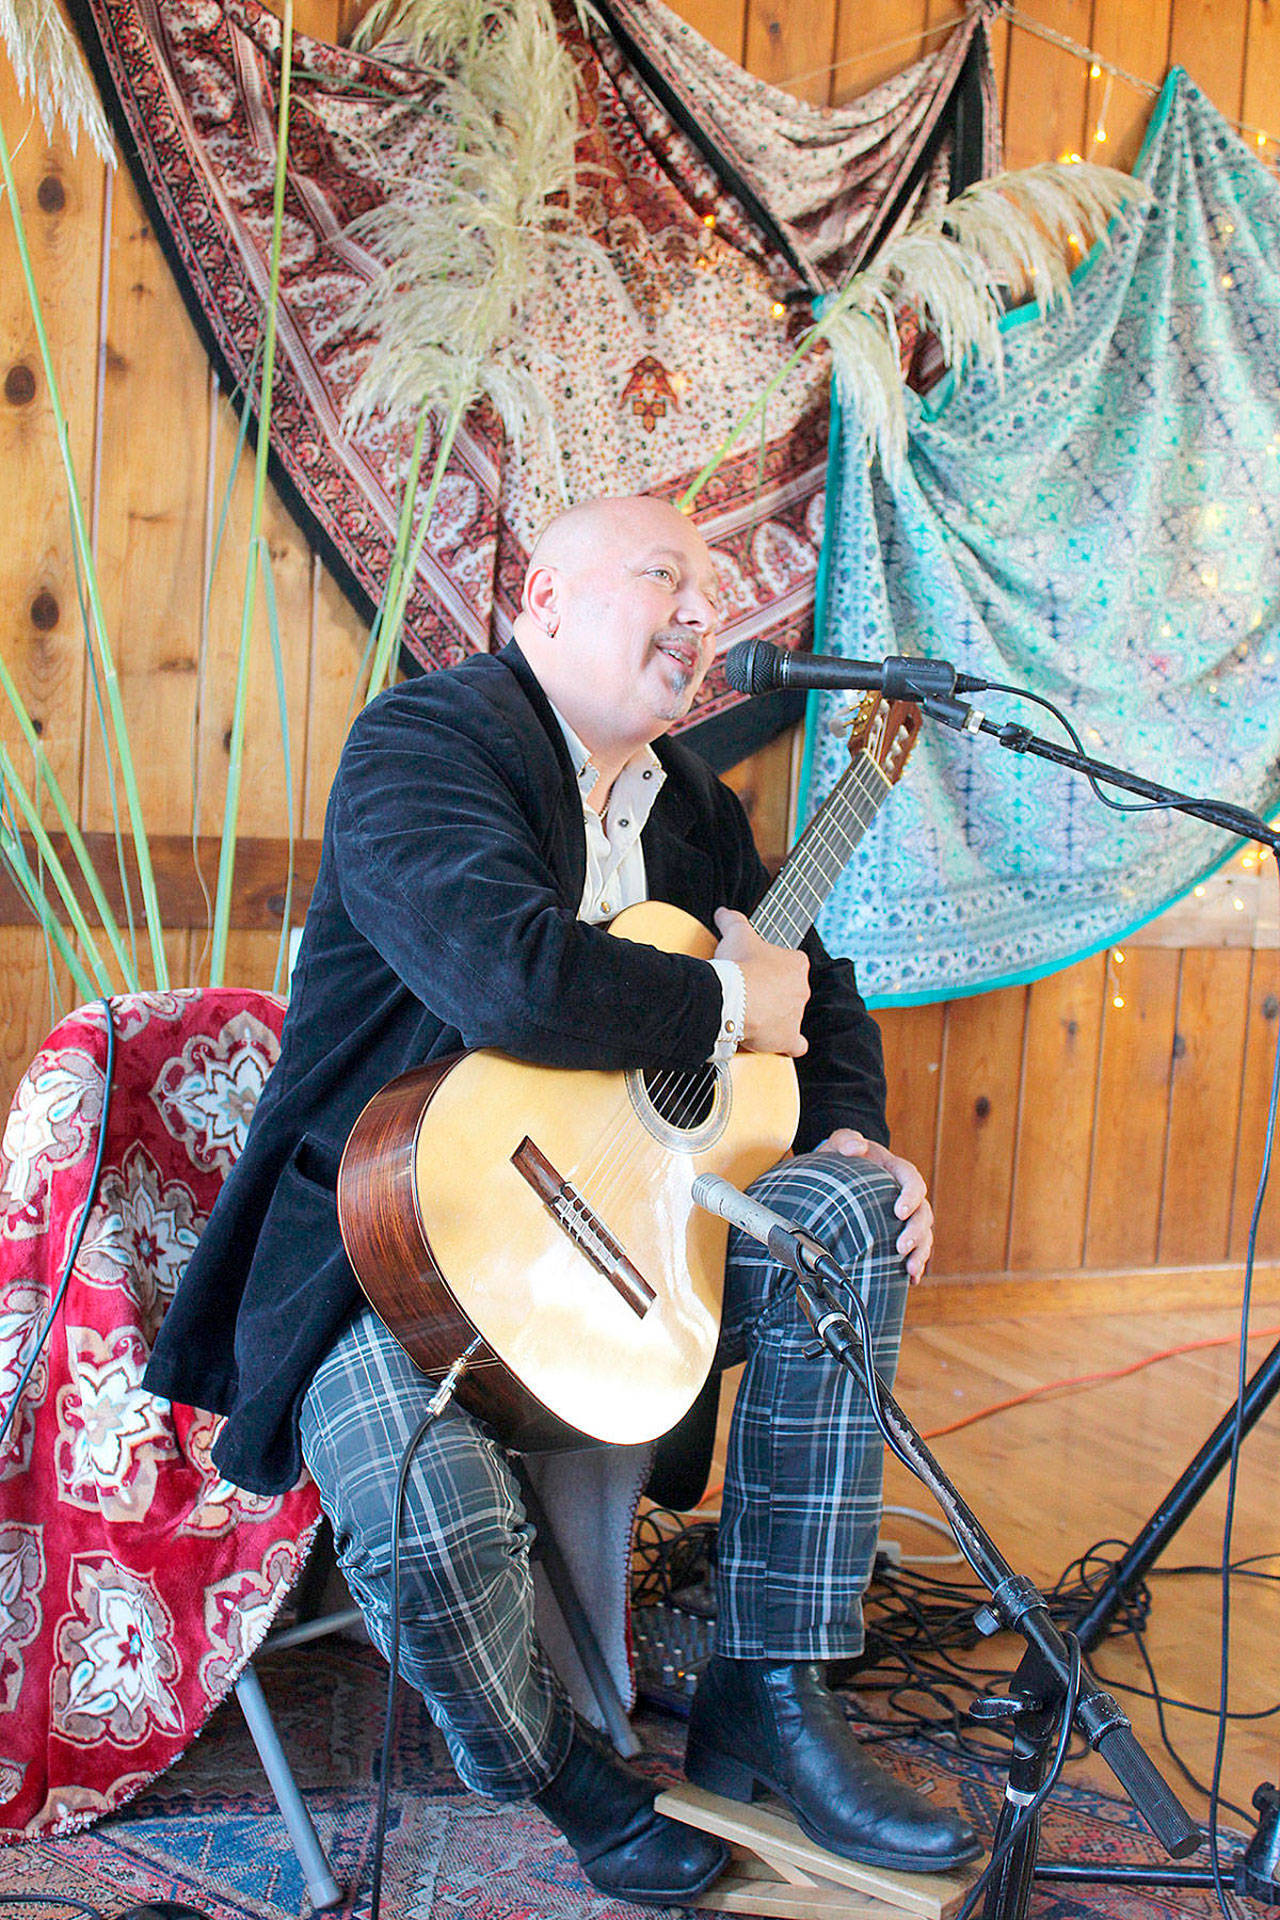 File photo/Whidbey News Group.                                Classical guitarist Andre Feriante of Langley plays at a gathering of Island Bohemians last year. He’s hosting a guitar festival at two South Whidbey wineries Aug. 10-12.